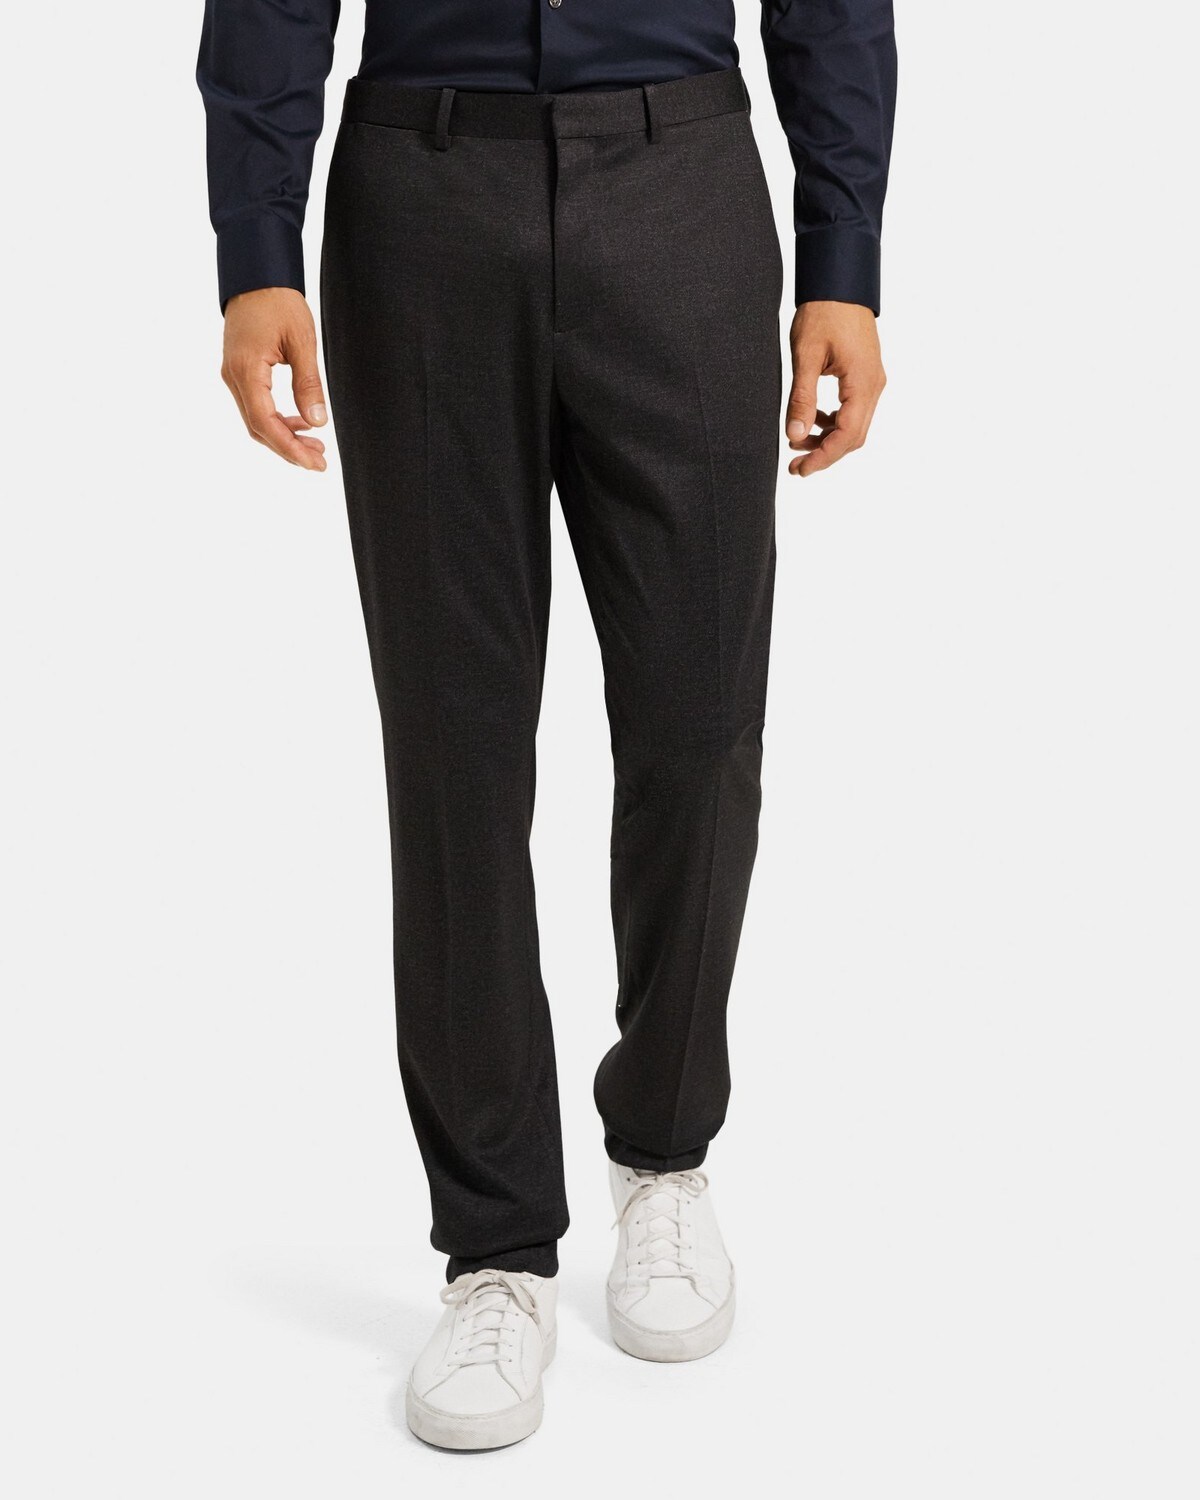 Slim-Fit Suit Pant in Knit Twill